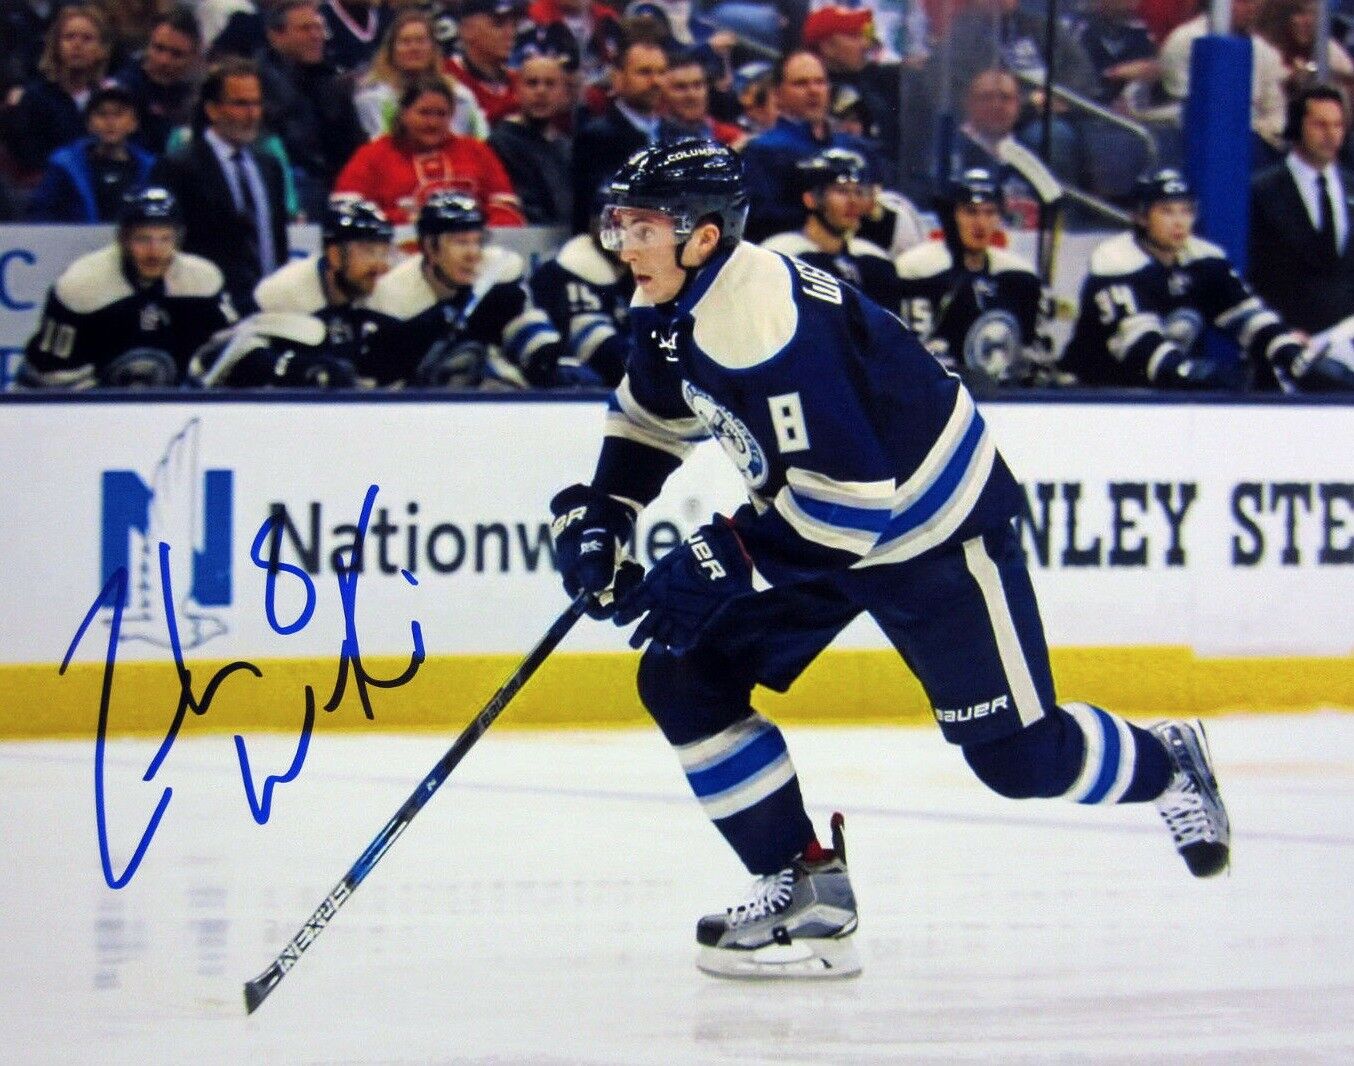 Zach Werenski Autographed Signed 8x10 Photo Poster painting ( Blue Jackets ) REPRINT